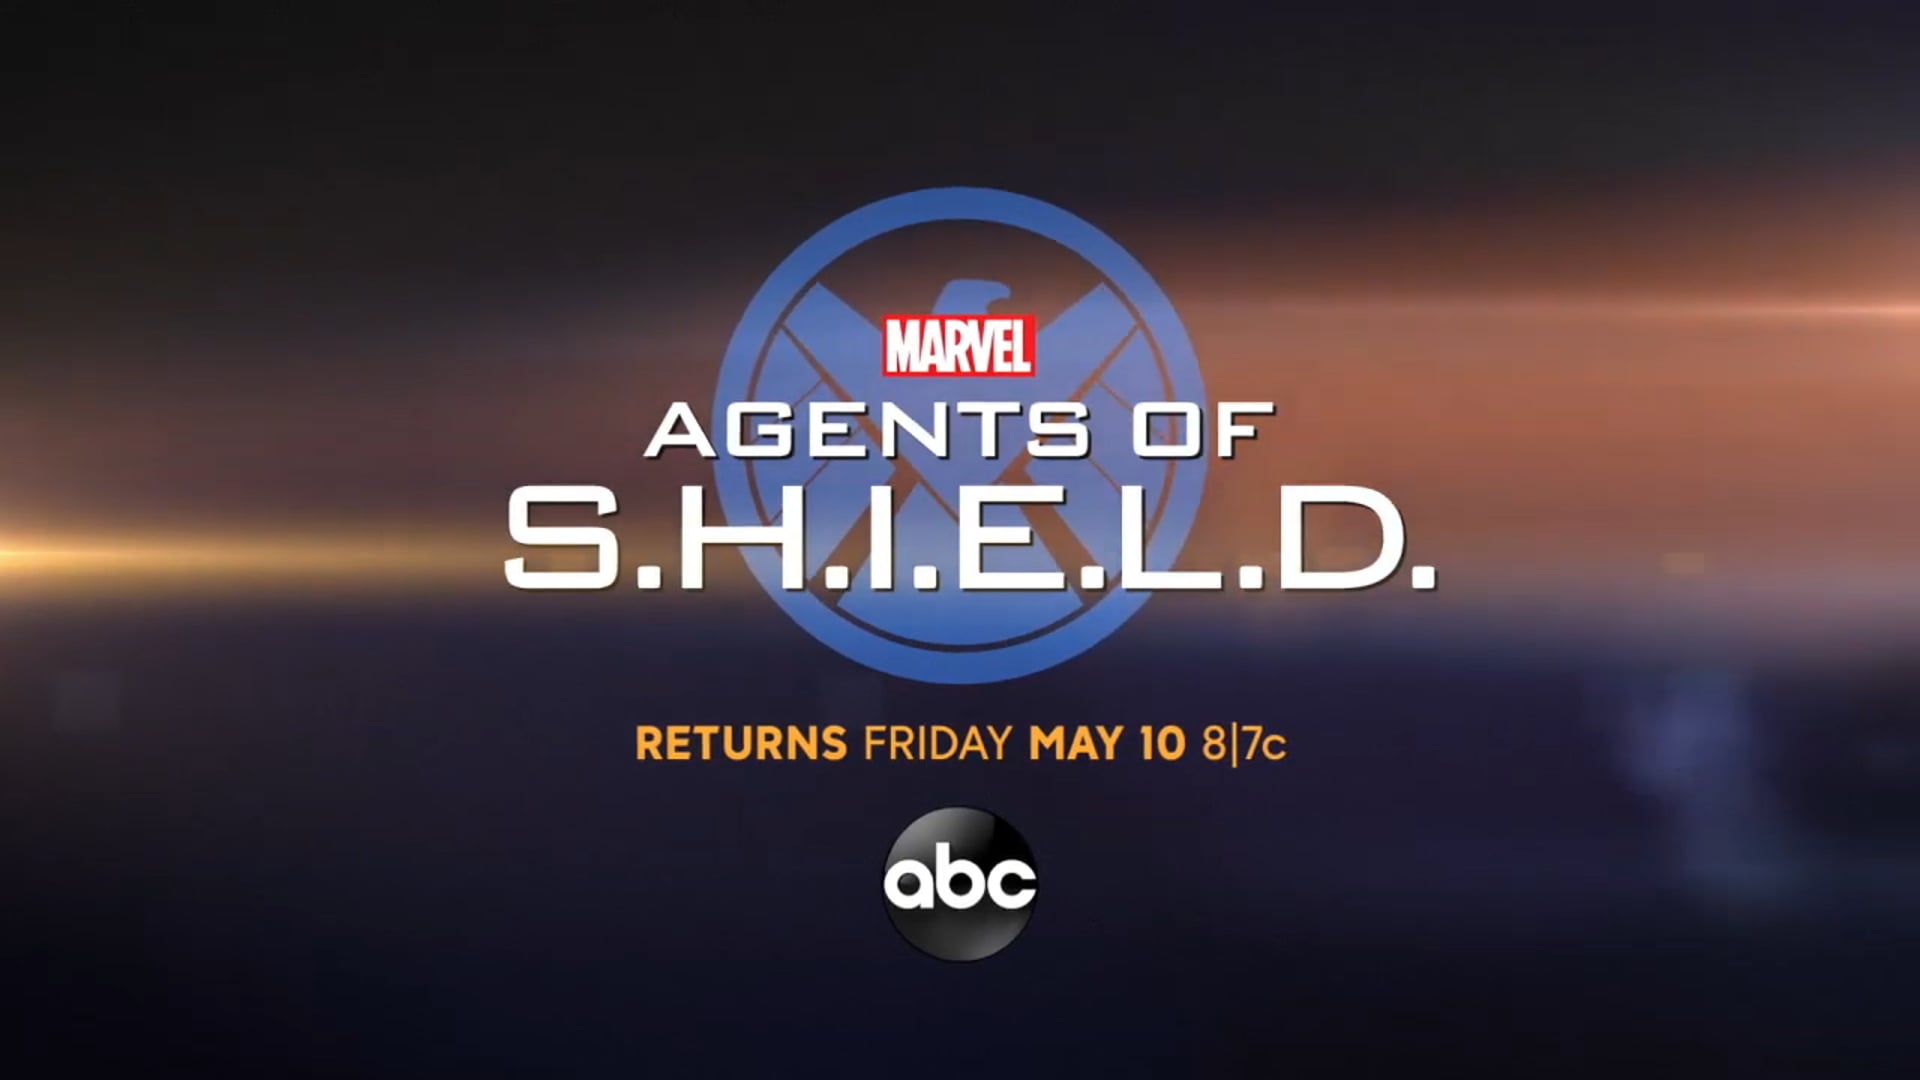 Agents of S.H.I.E.L.D. - "The End" Trailer